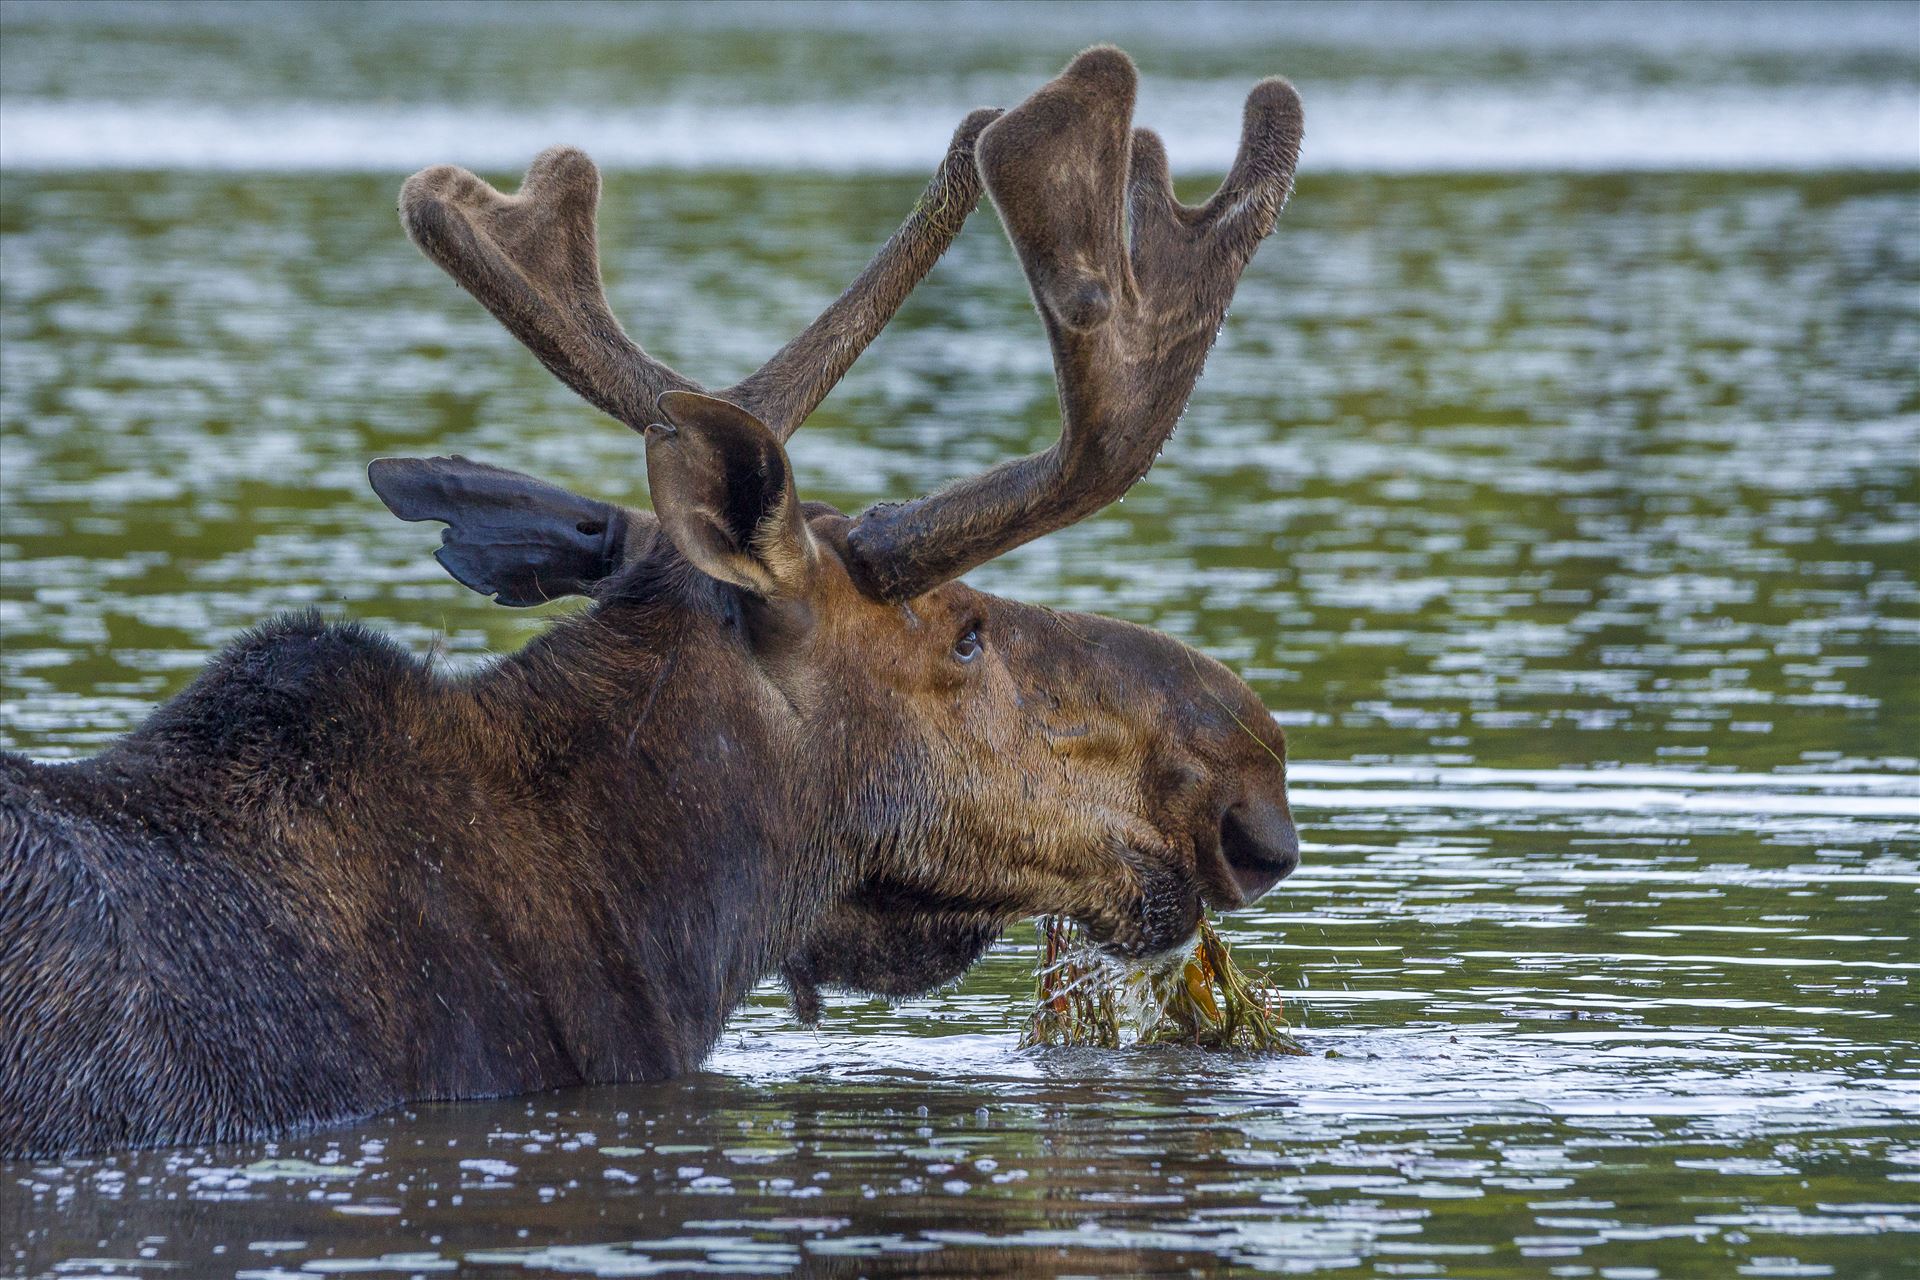 Bull Moose Eating His Salad - Bull getting his daily 45 lbs. of Salad by Buckmaster